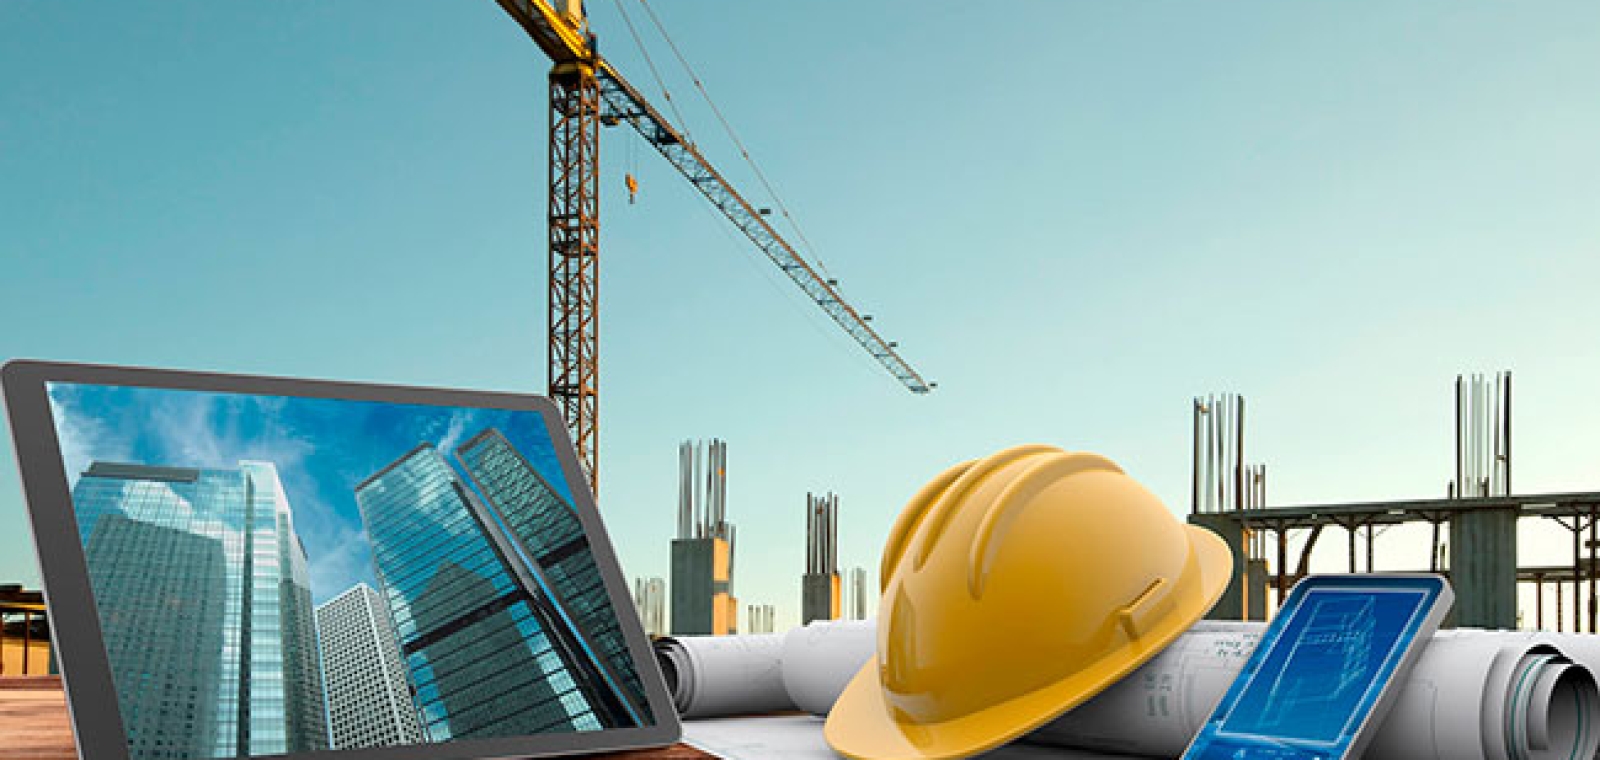 Which region has the most construction companies?